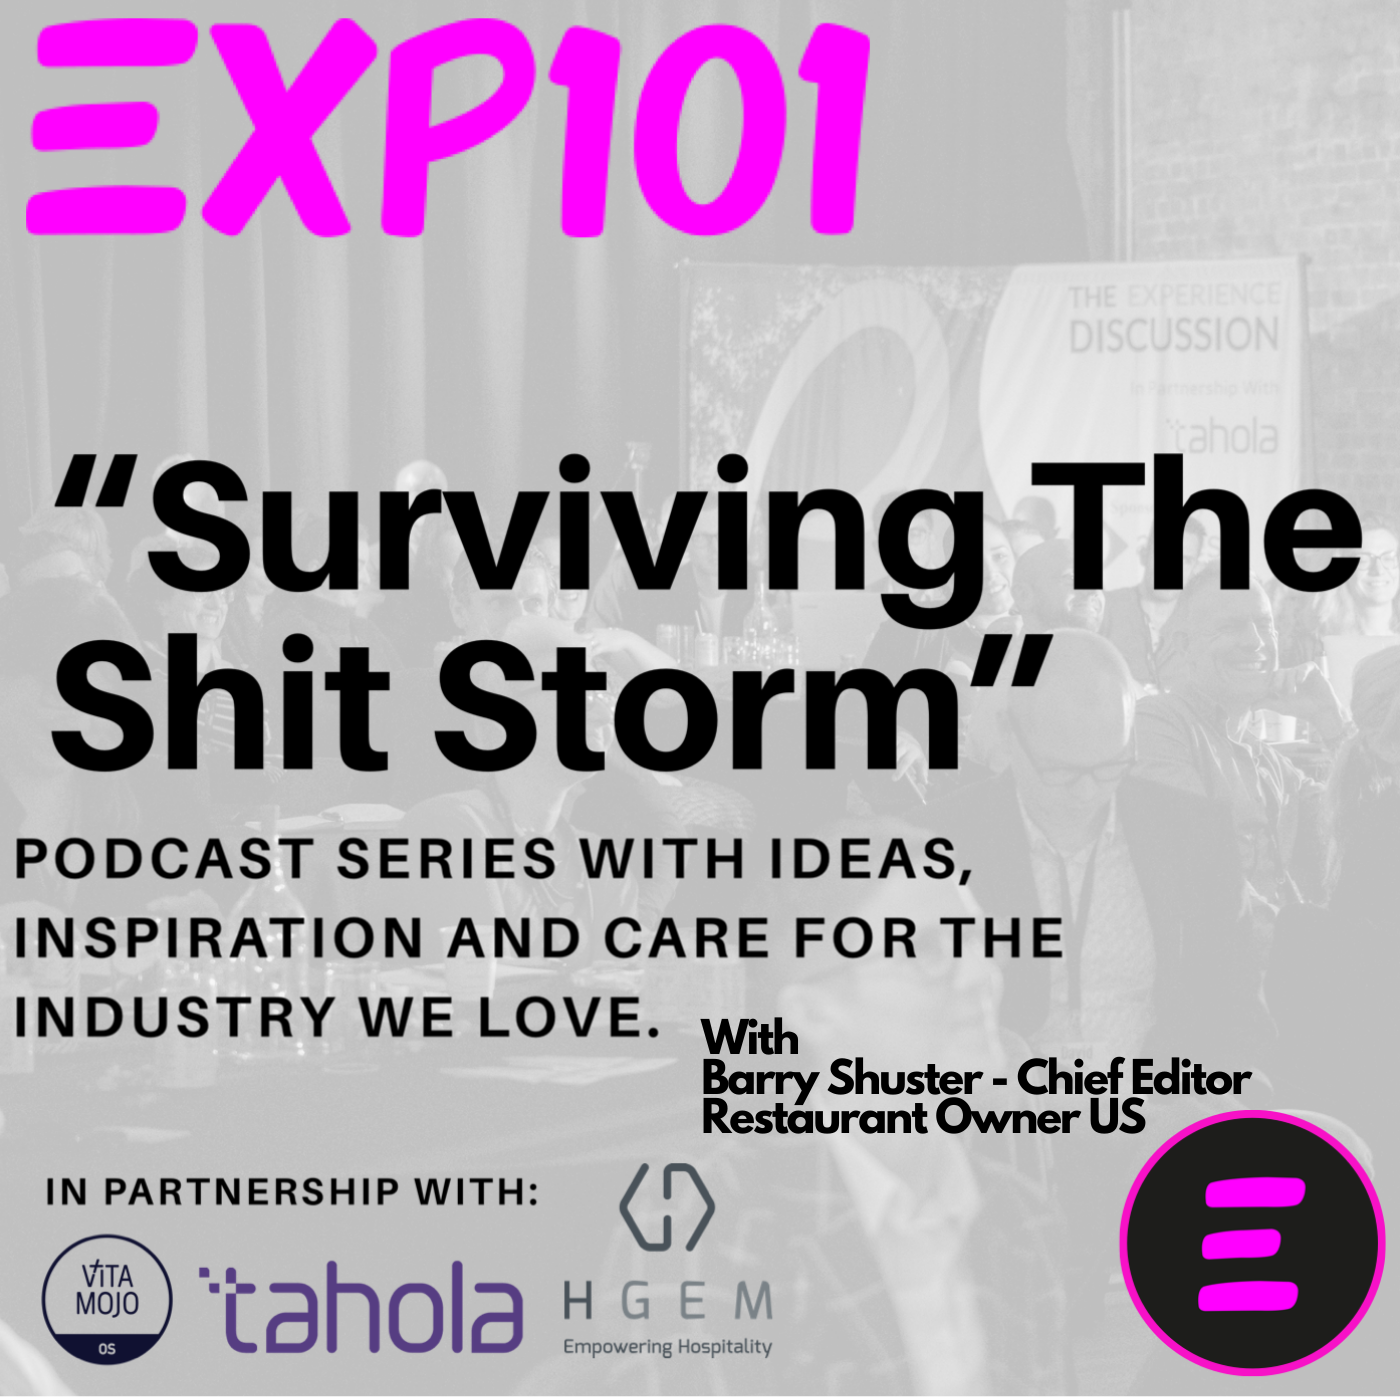 Surviving The Shit Storm Episode 9 with Barry Shuster, Editor-in-Chief, Restaurant Startup & Growth-RestaurantOwner.com Image